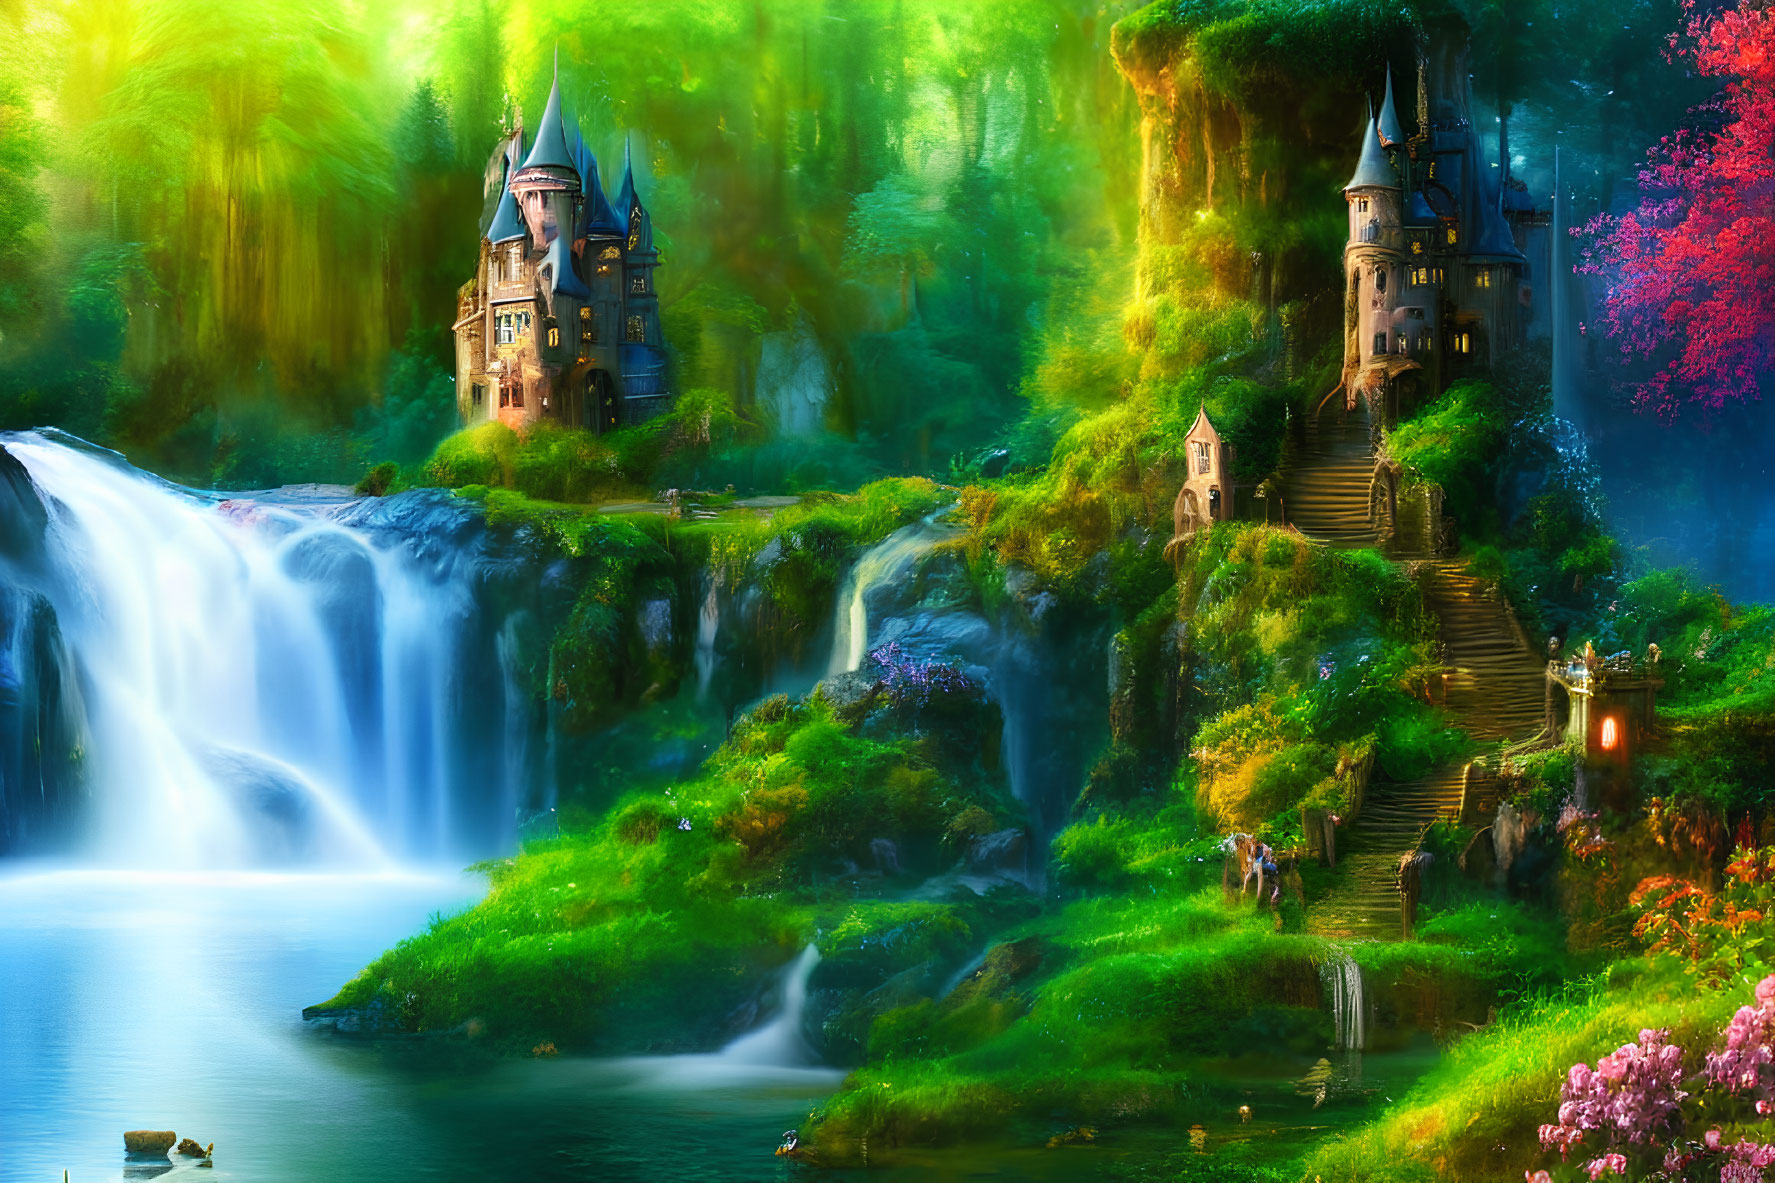 Majestic landscape with waterfalls, flora, castles, and a couple in ethereal ambiance